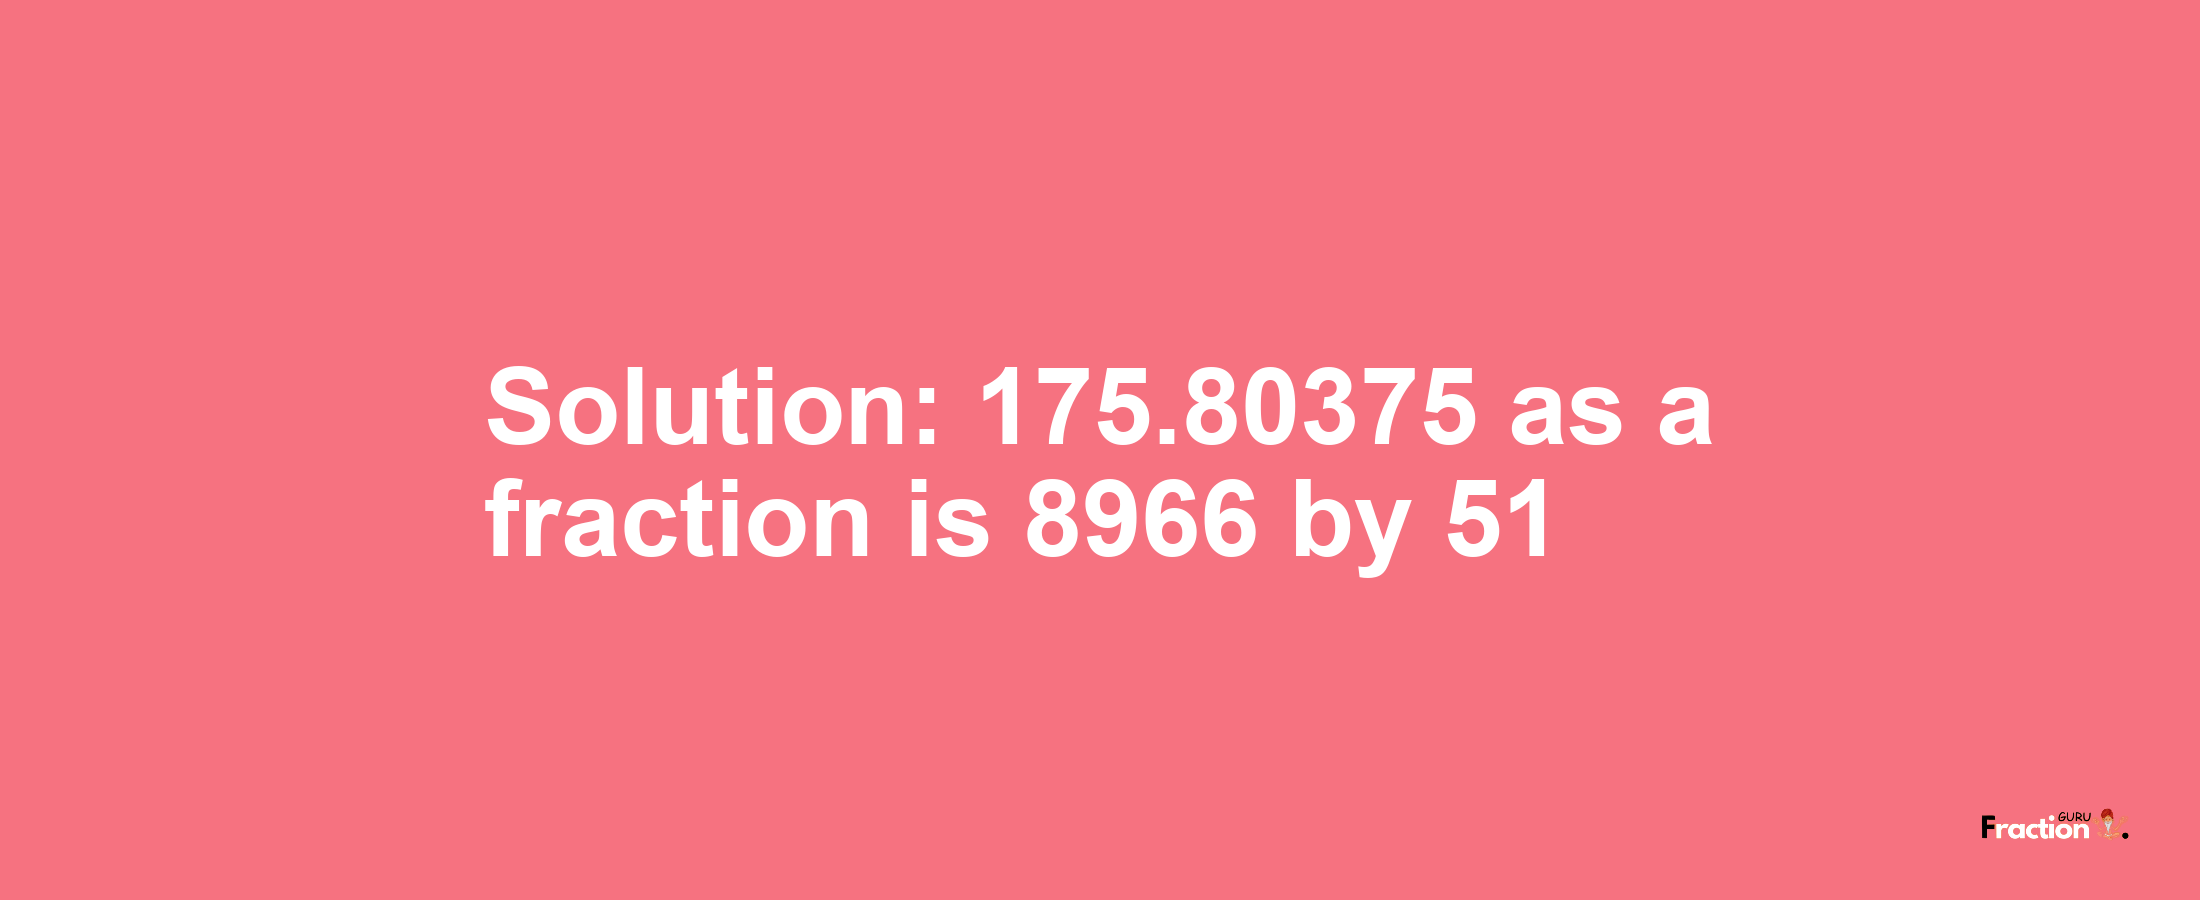 Solution:175.80375 as a fraction is 8966/51